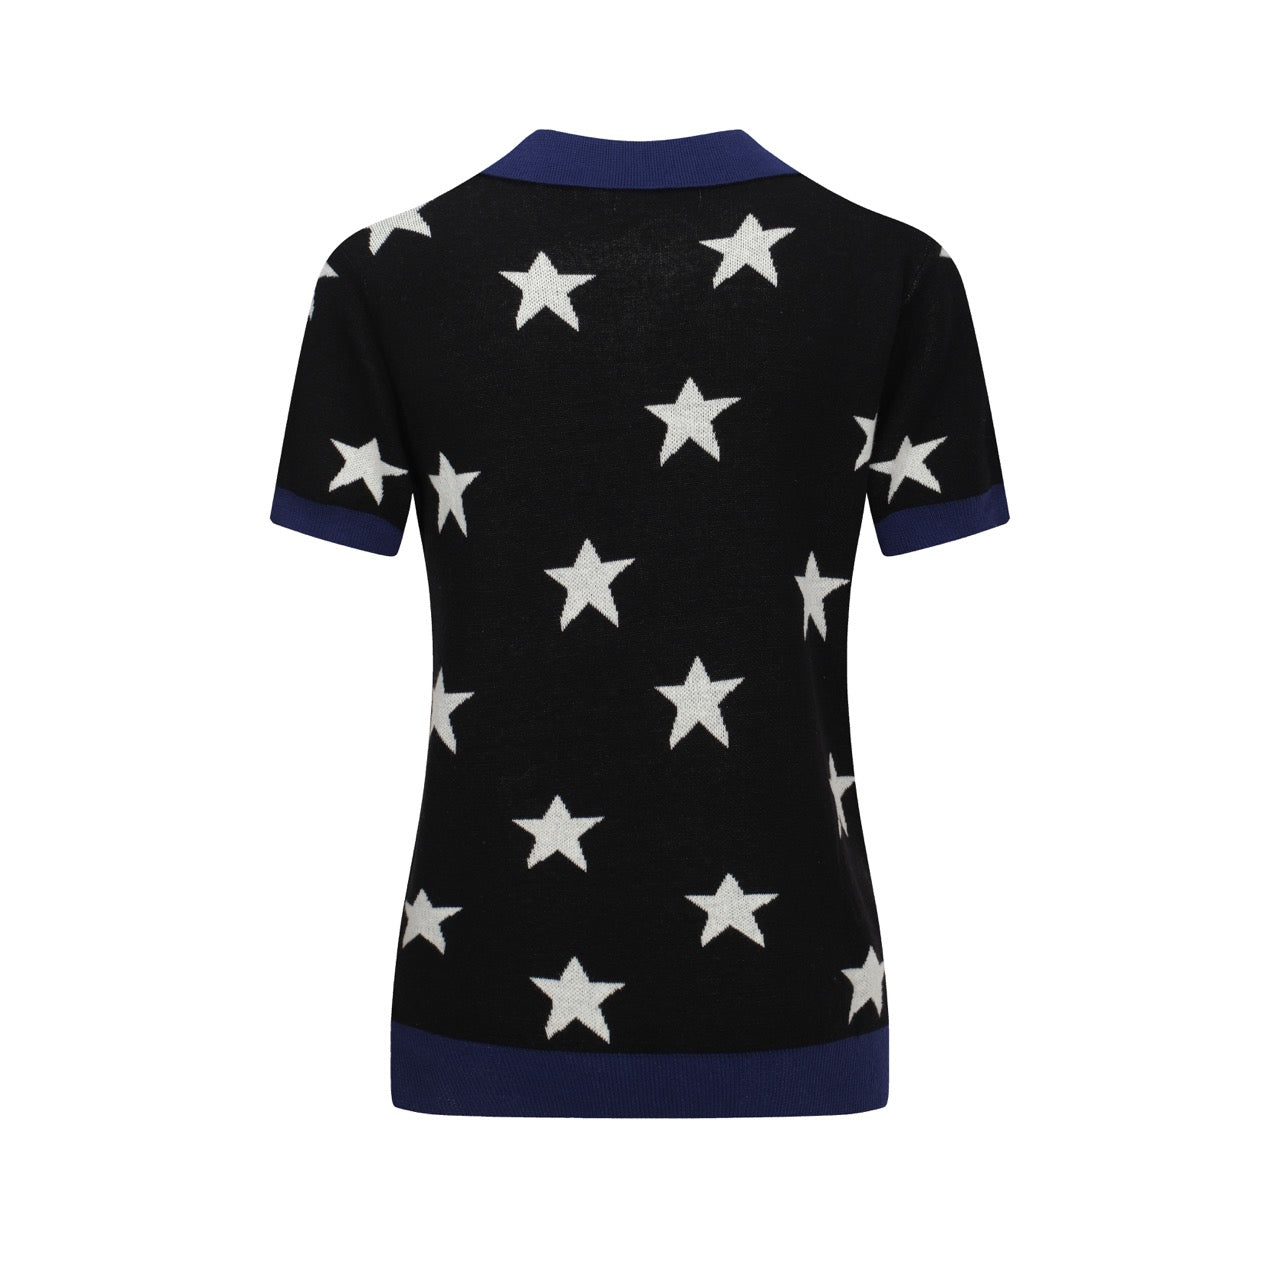 Women's V-neck knitted polo with star